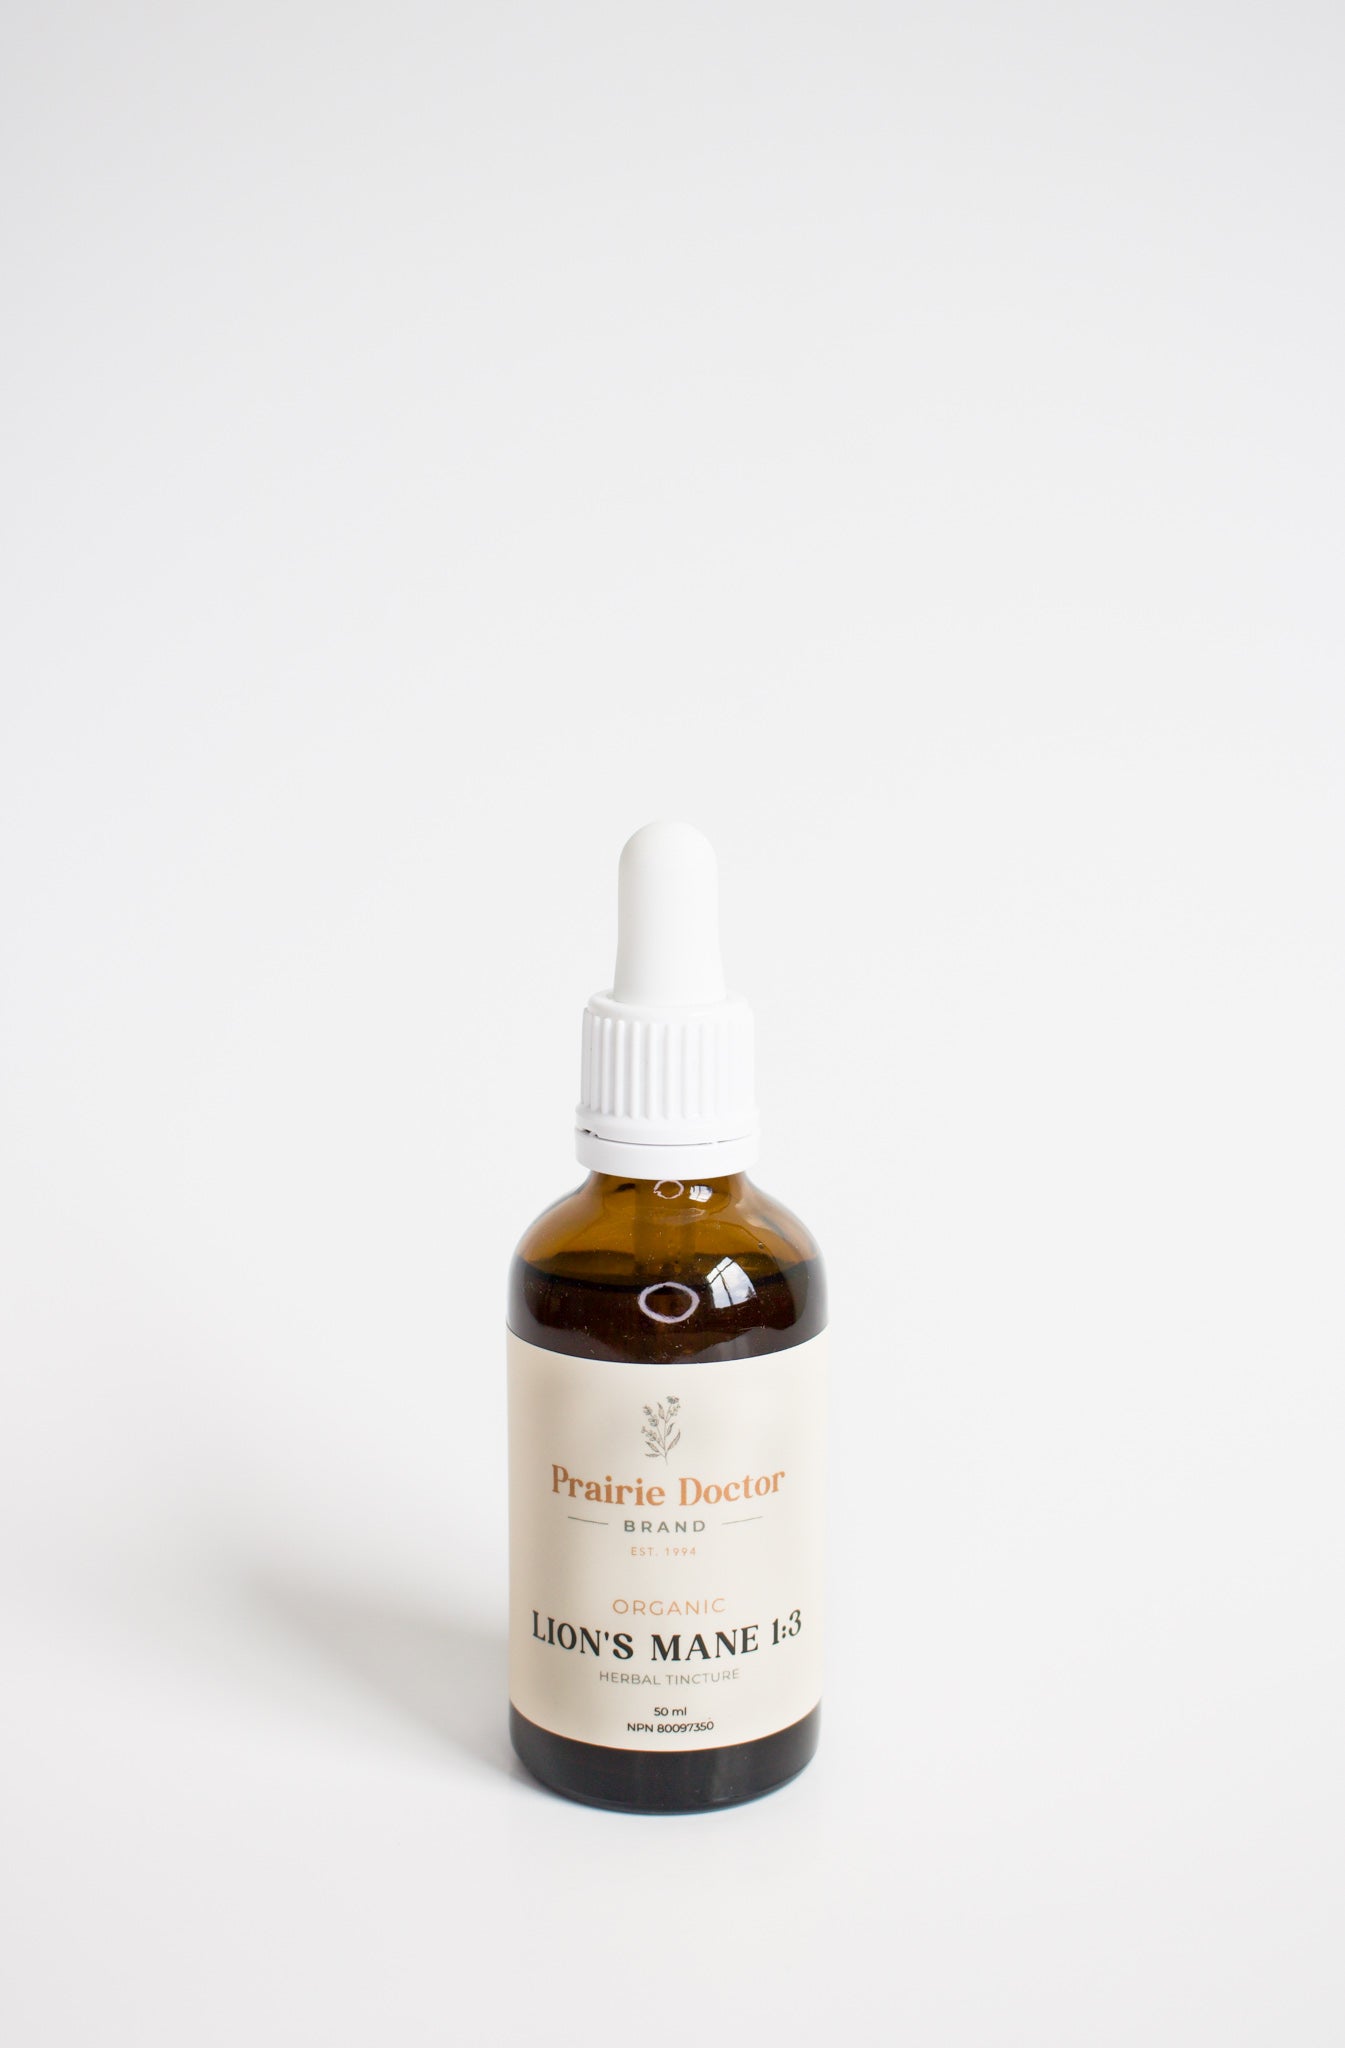 Our organic Lion's Mane herbal tincture is a source of fungal polysaccharides with immunomodulating properties.